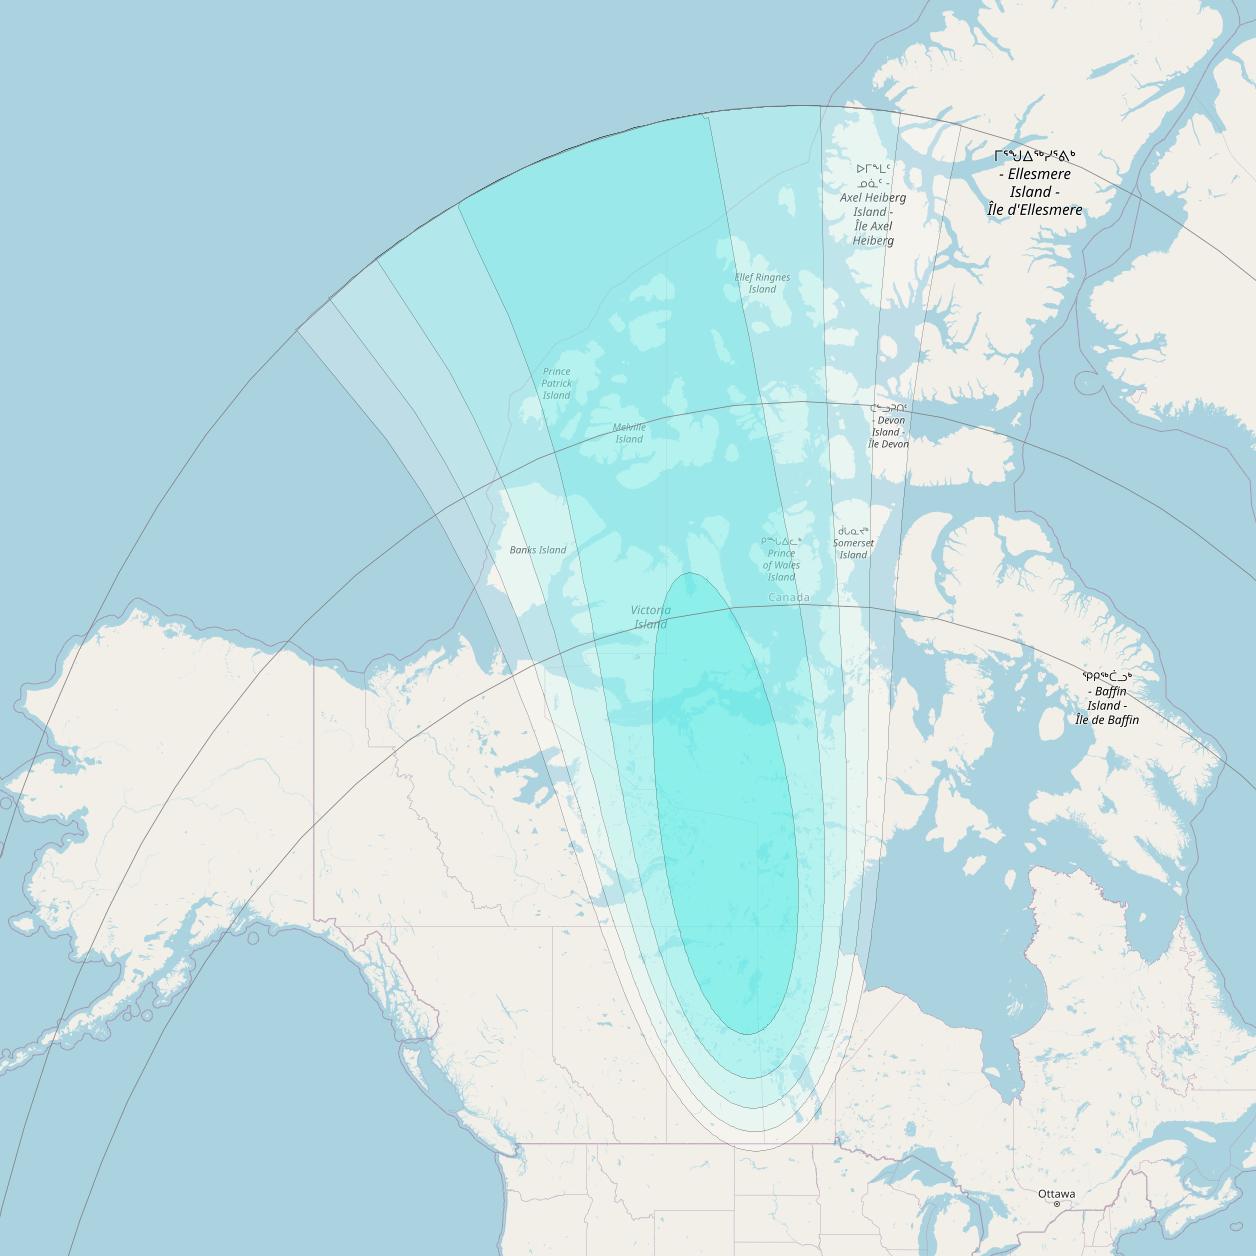 Inmarsat-4F3 at 98° W downlink L-band S096 User Spot beam coverage map